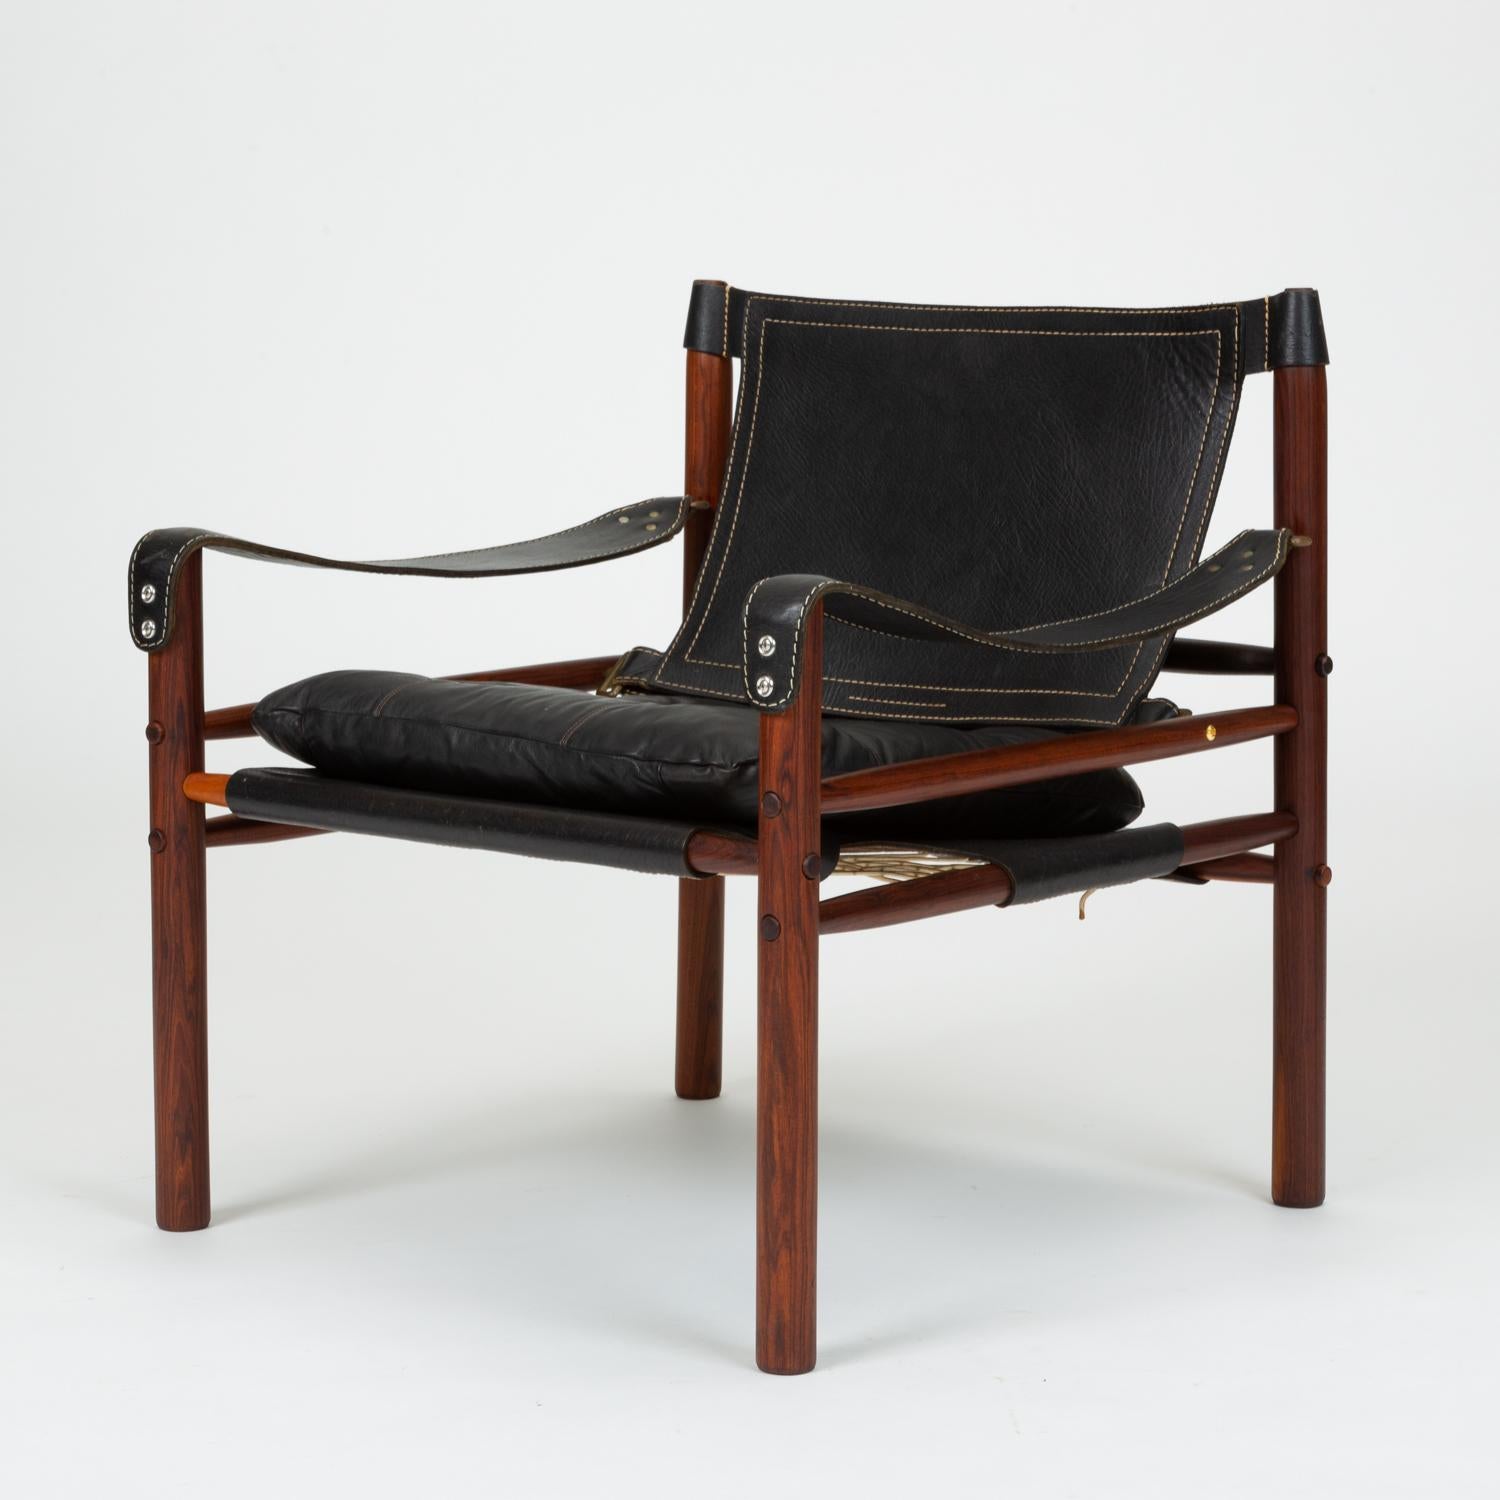 20th Century Pair of Rosewood and Leather Safari Chairs by Arne Norell